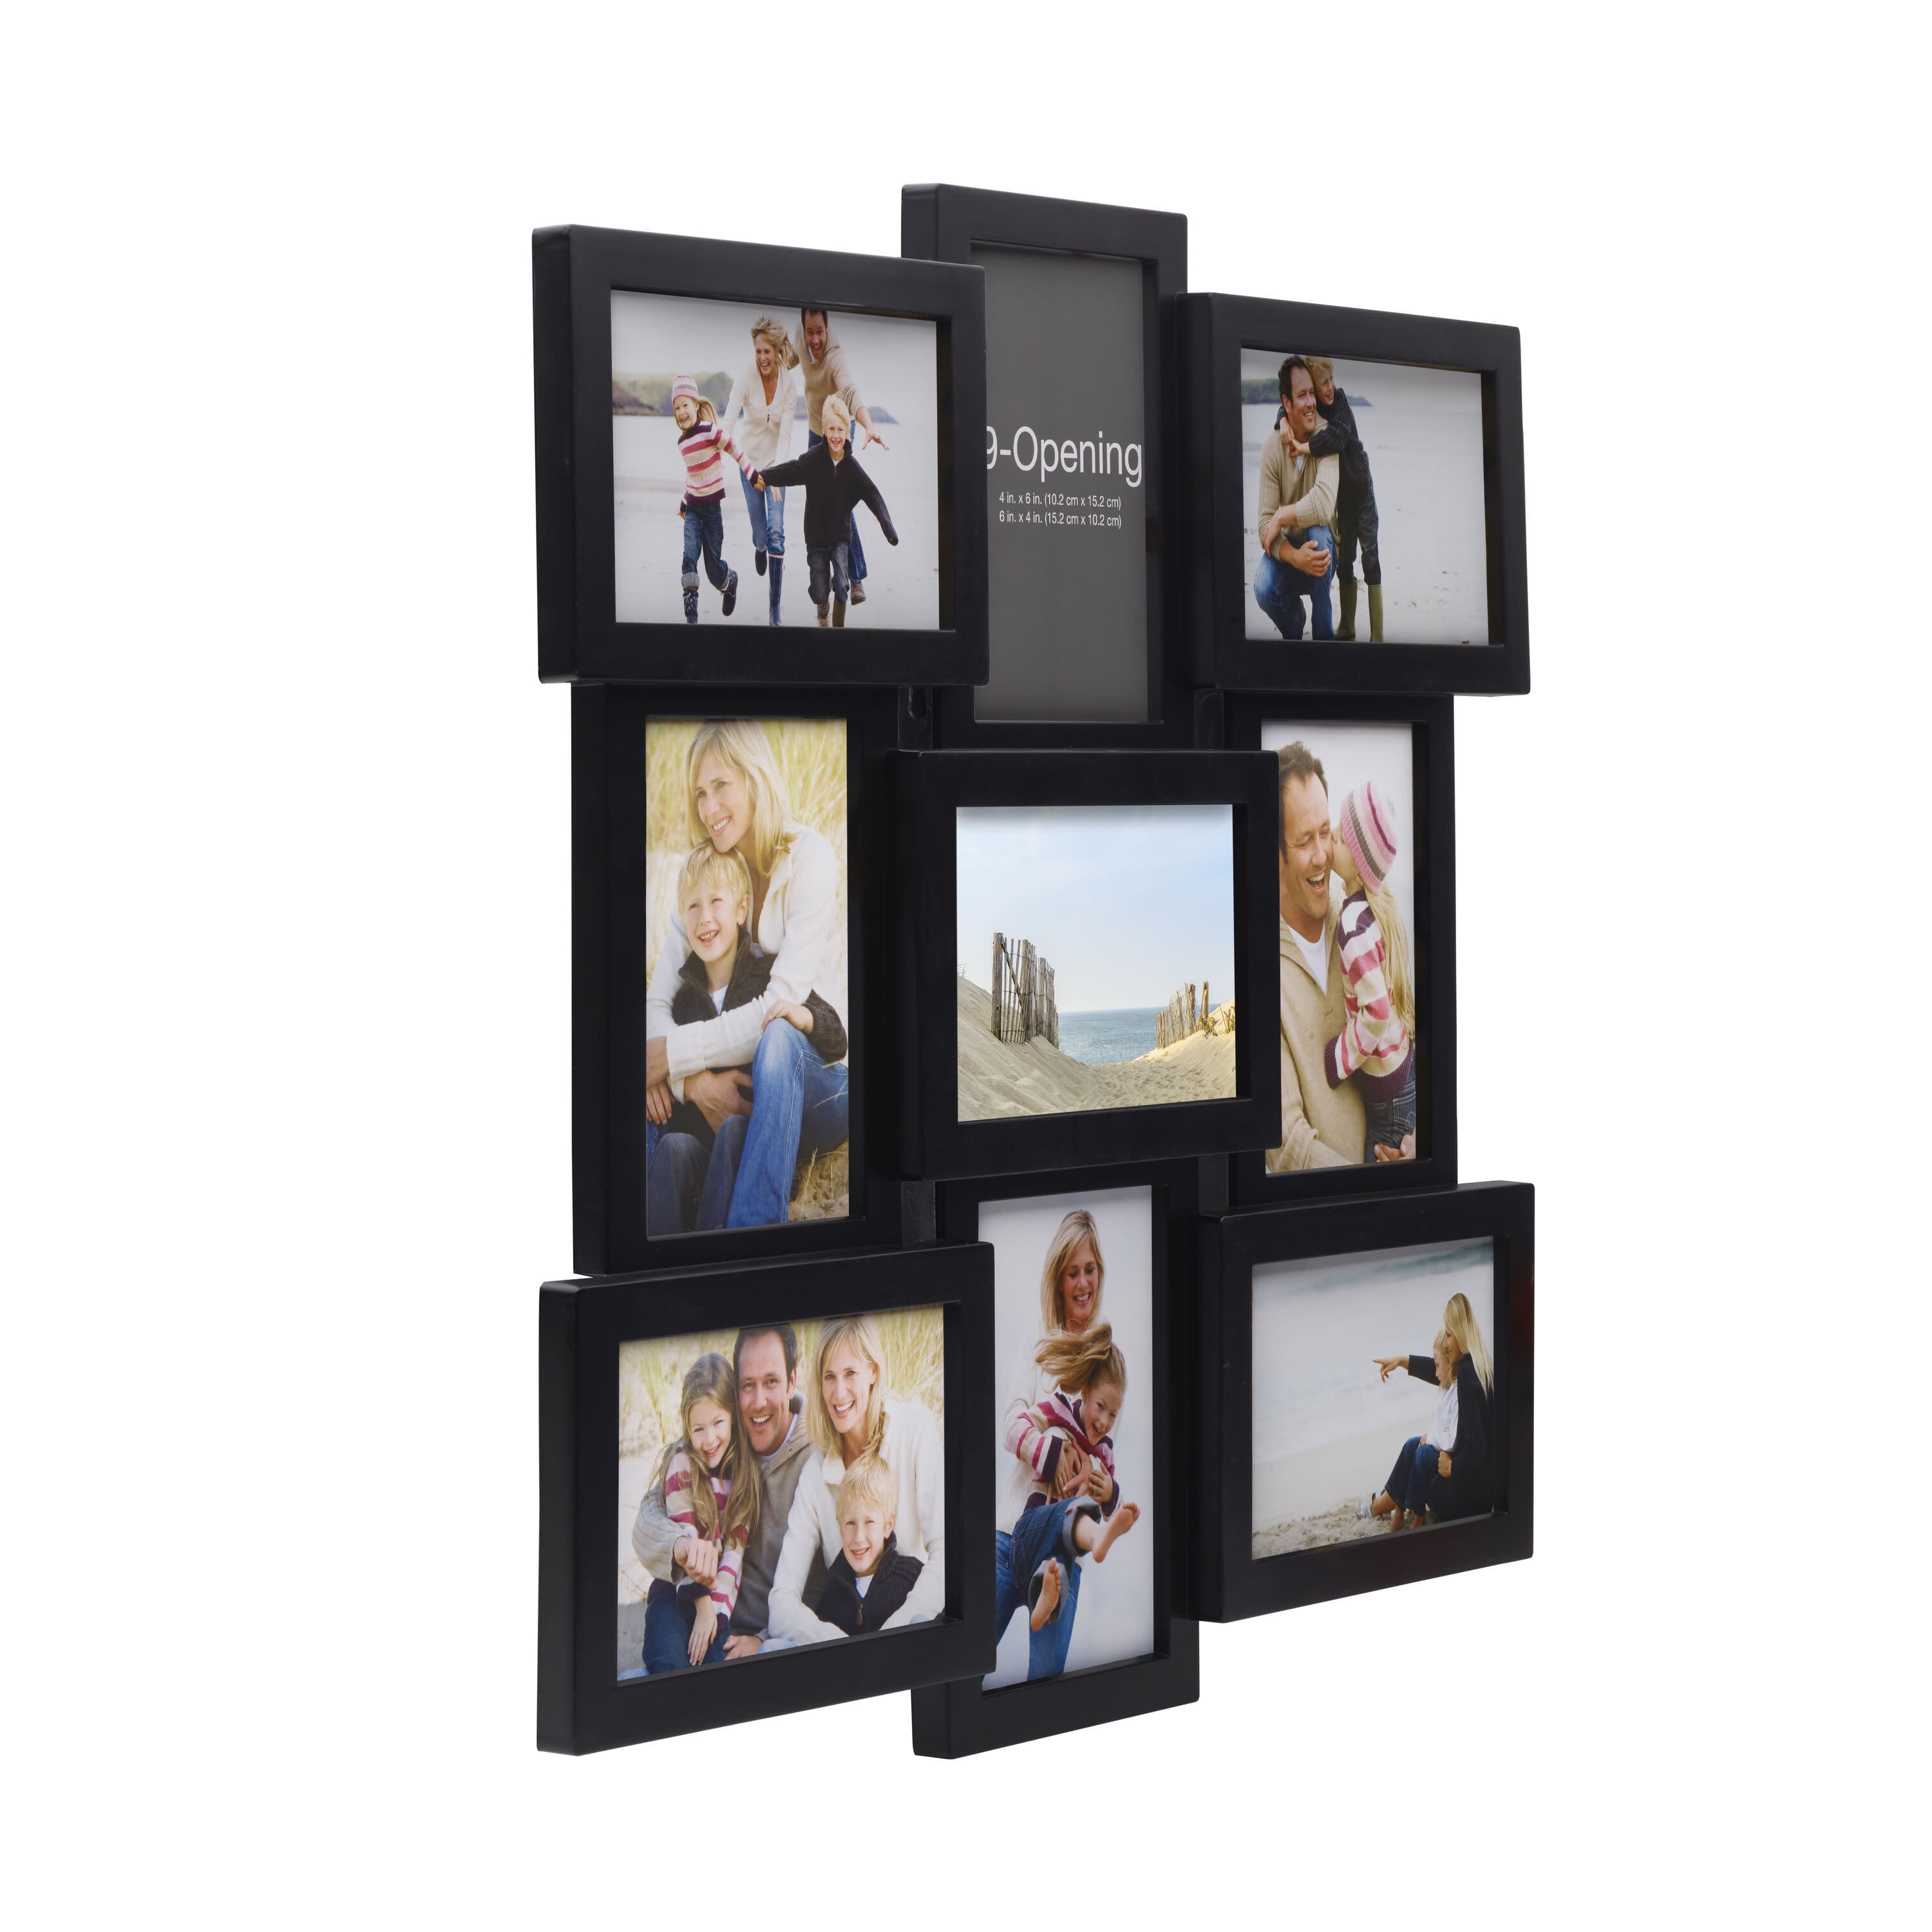 Melannco 9-Opening Puzzle Collage Picture Frame Black 